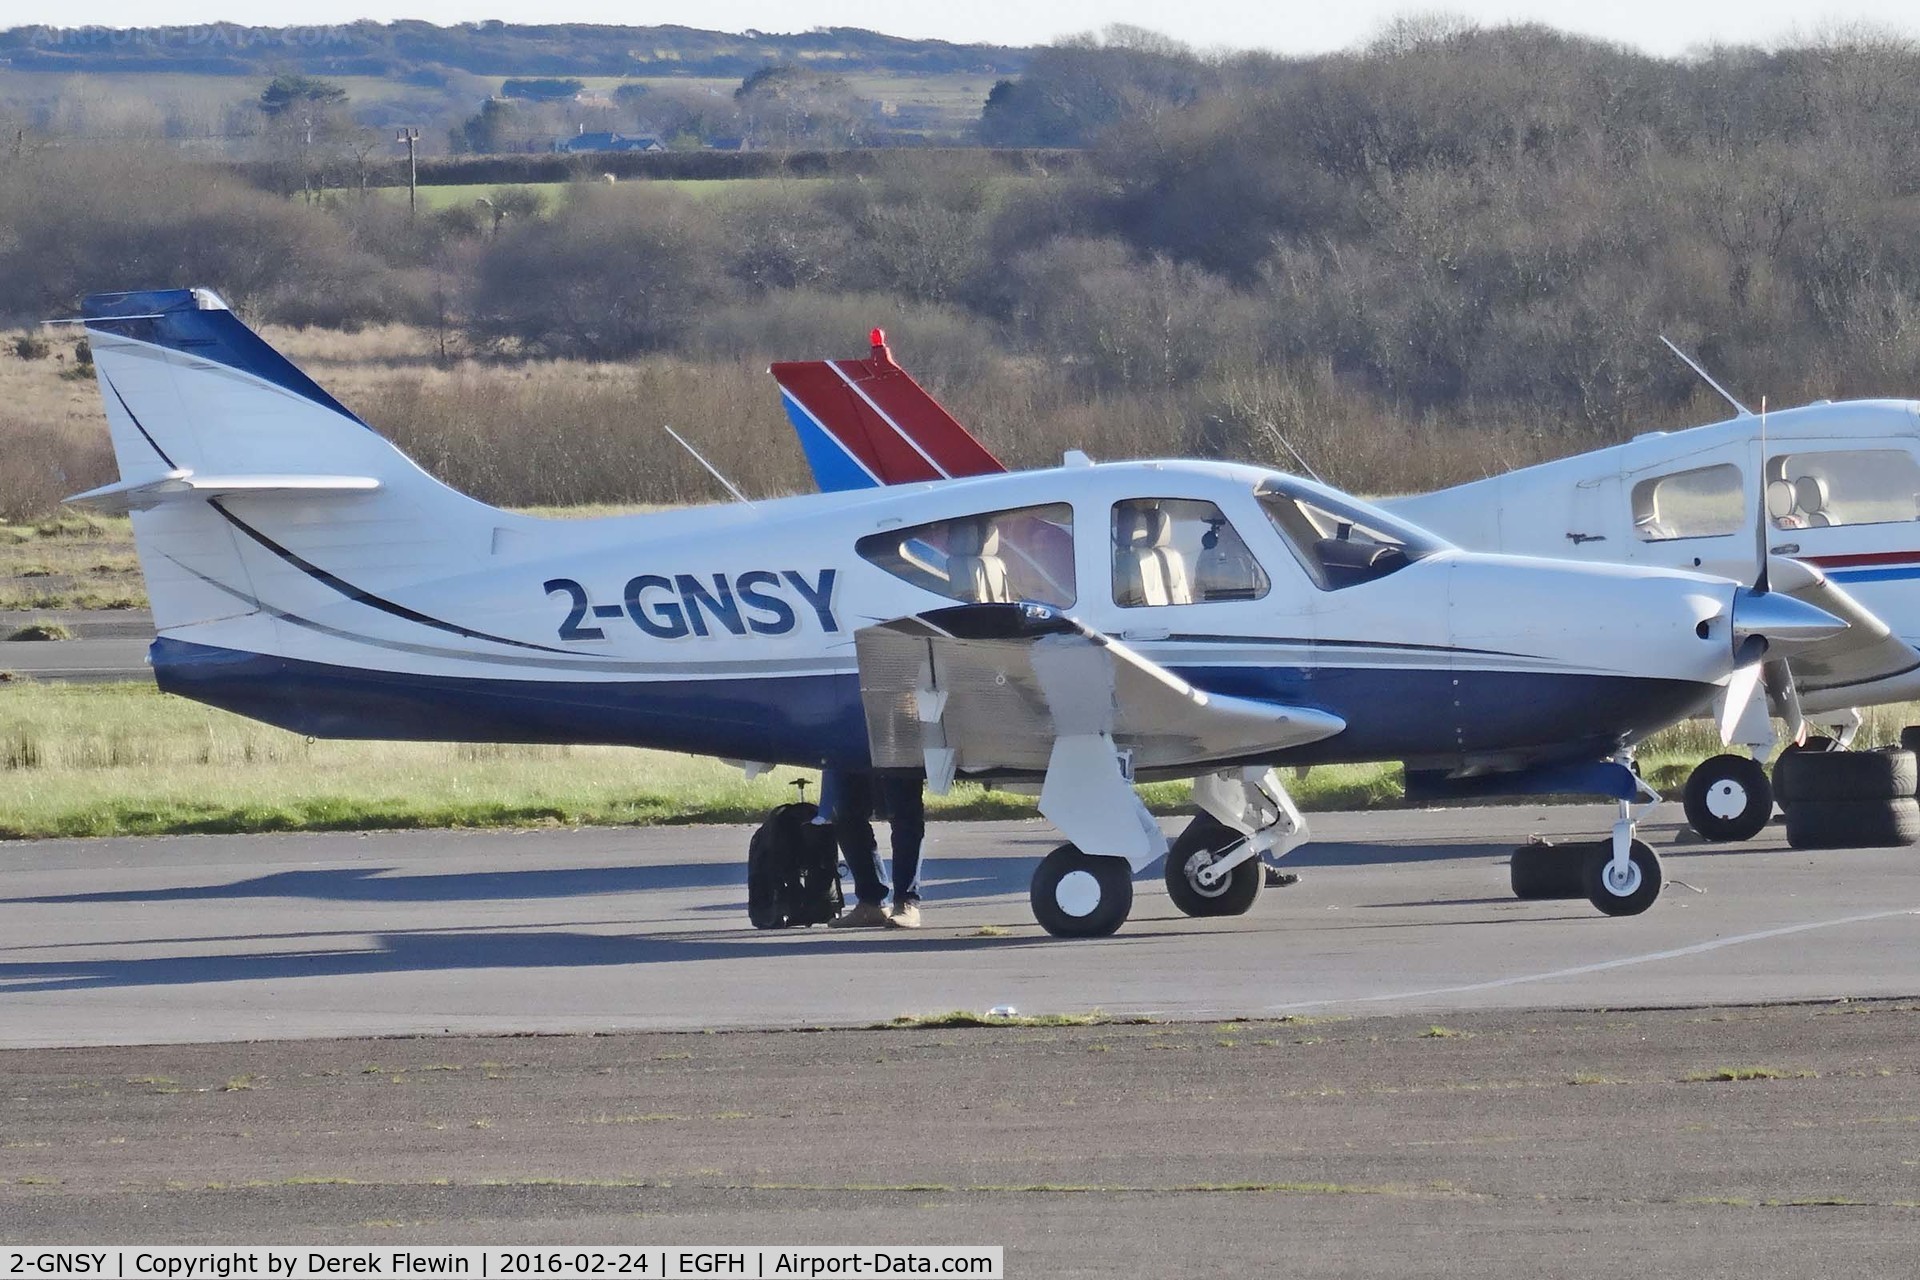 2-GNSY, 2000 Rockwell Commander 114B C/N 14679, Commander 114B, Guernsey based, previously N850DW, NX8CK, parked up.